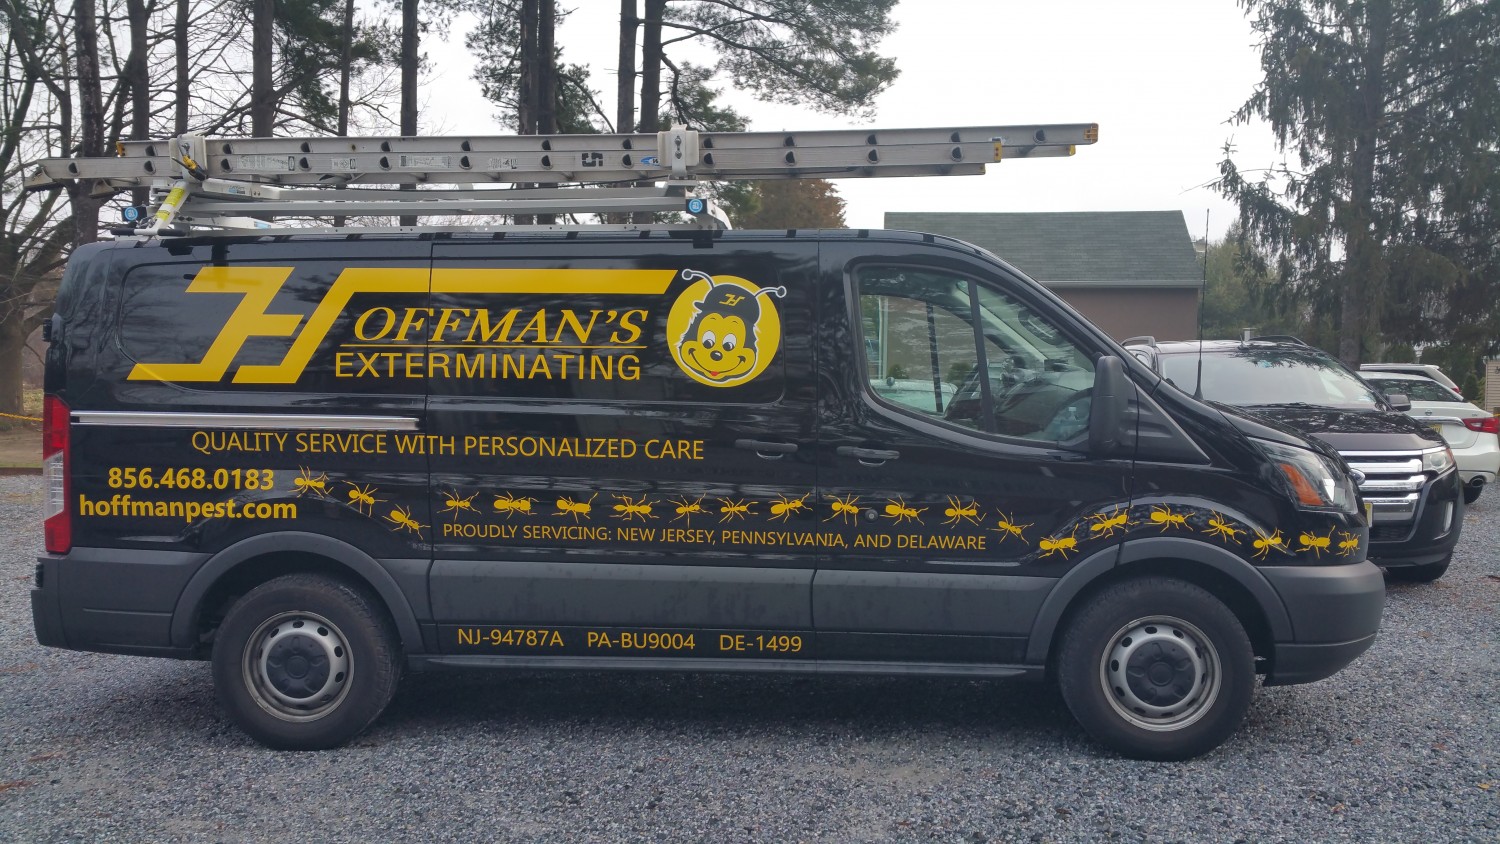 Hoffman’s Exterminating Co. 